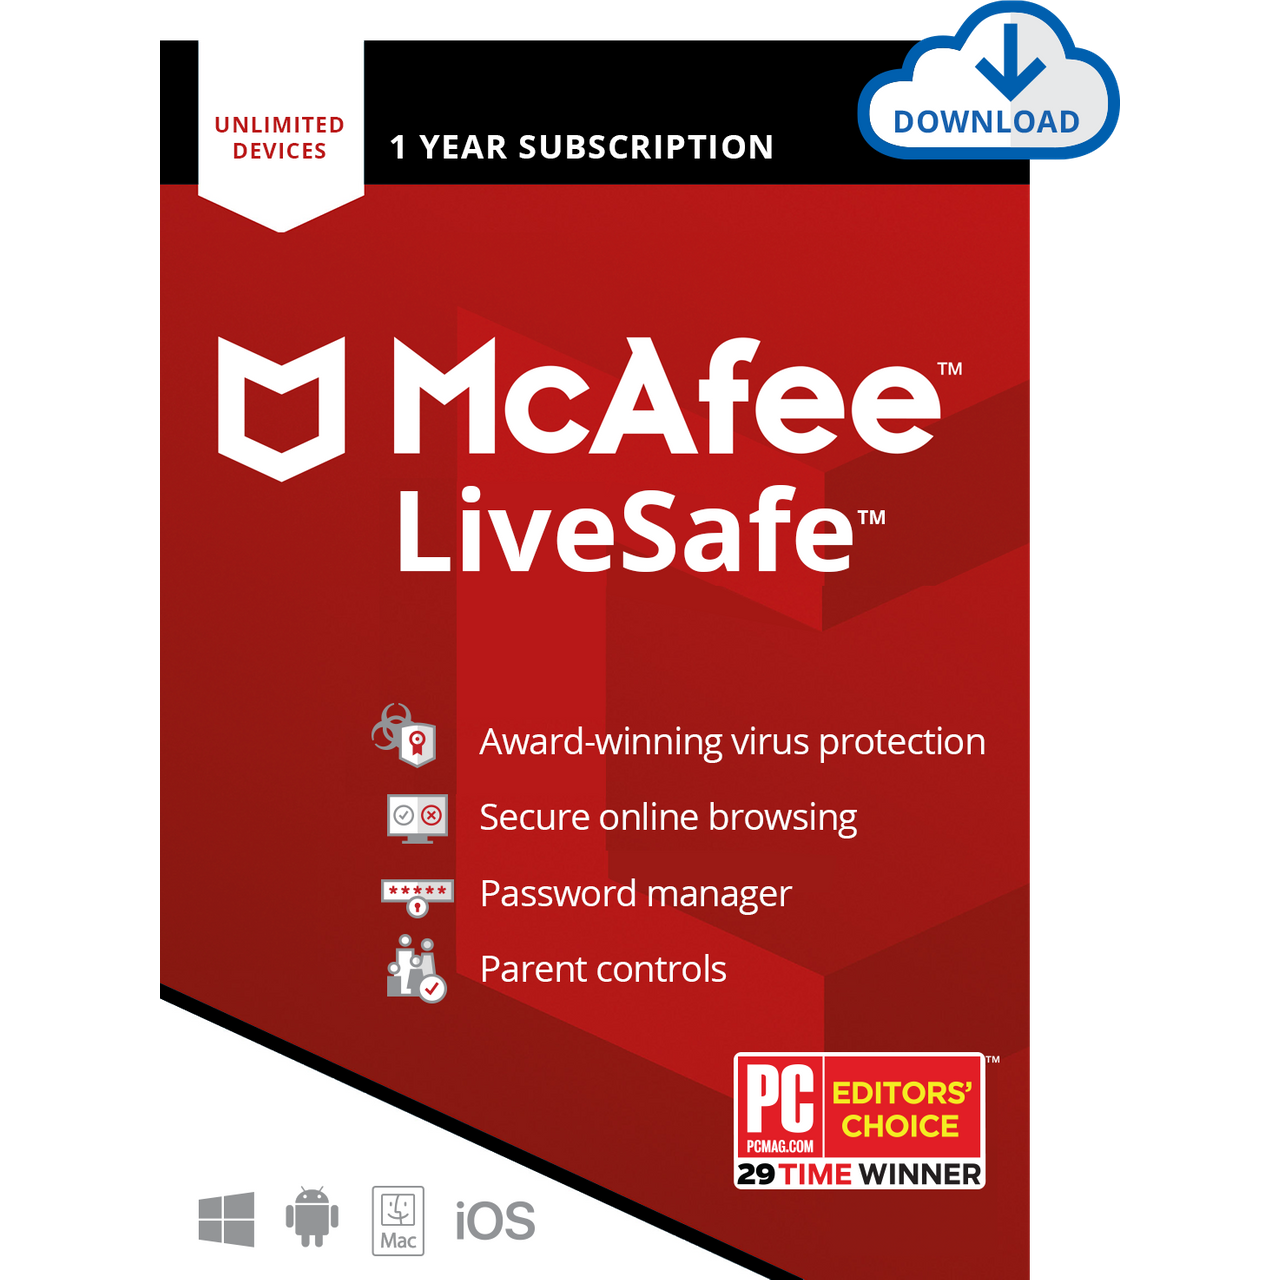 McAfee LiveSafe Digital Download for Unlimited Devices Review